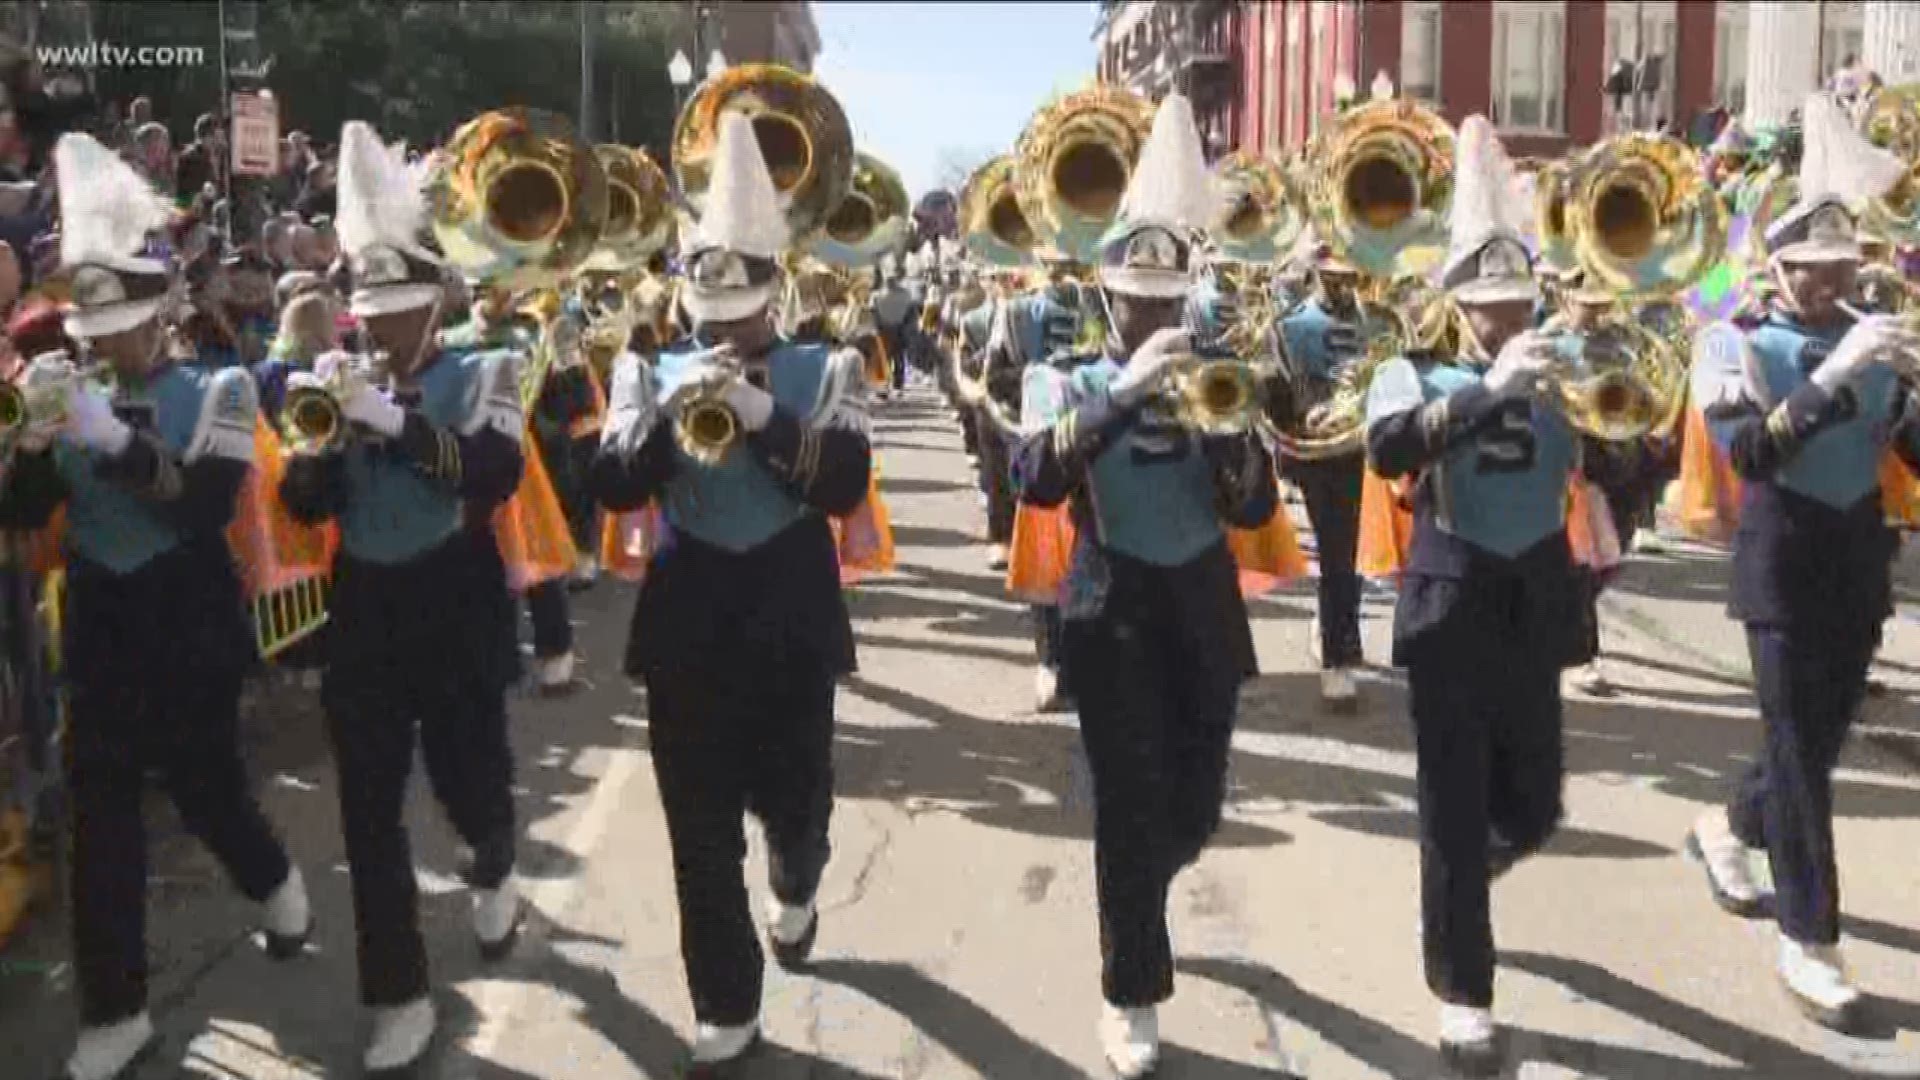 The Southern University Marching Band - AKA 'The Human Jukebox' at Gallier Hall on Mardi Gras Day 2018. 